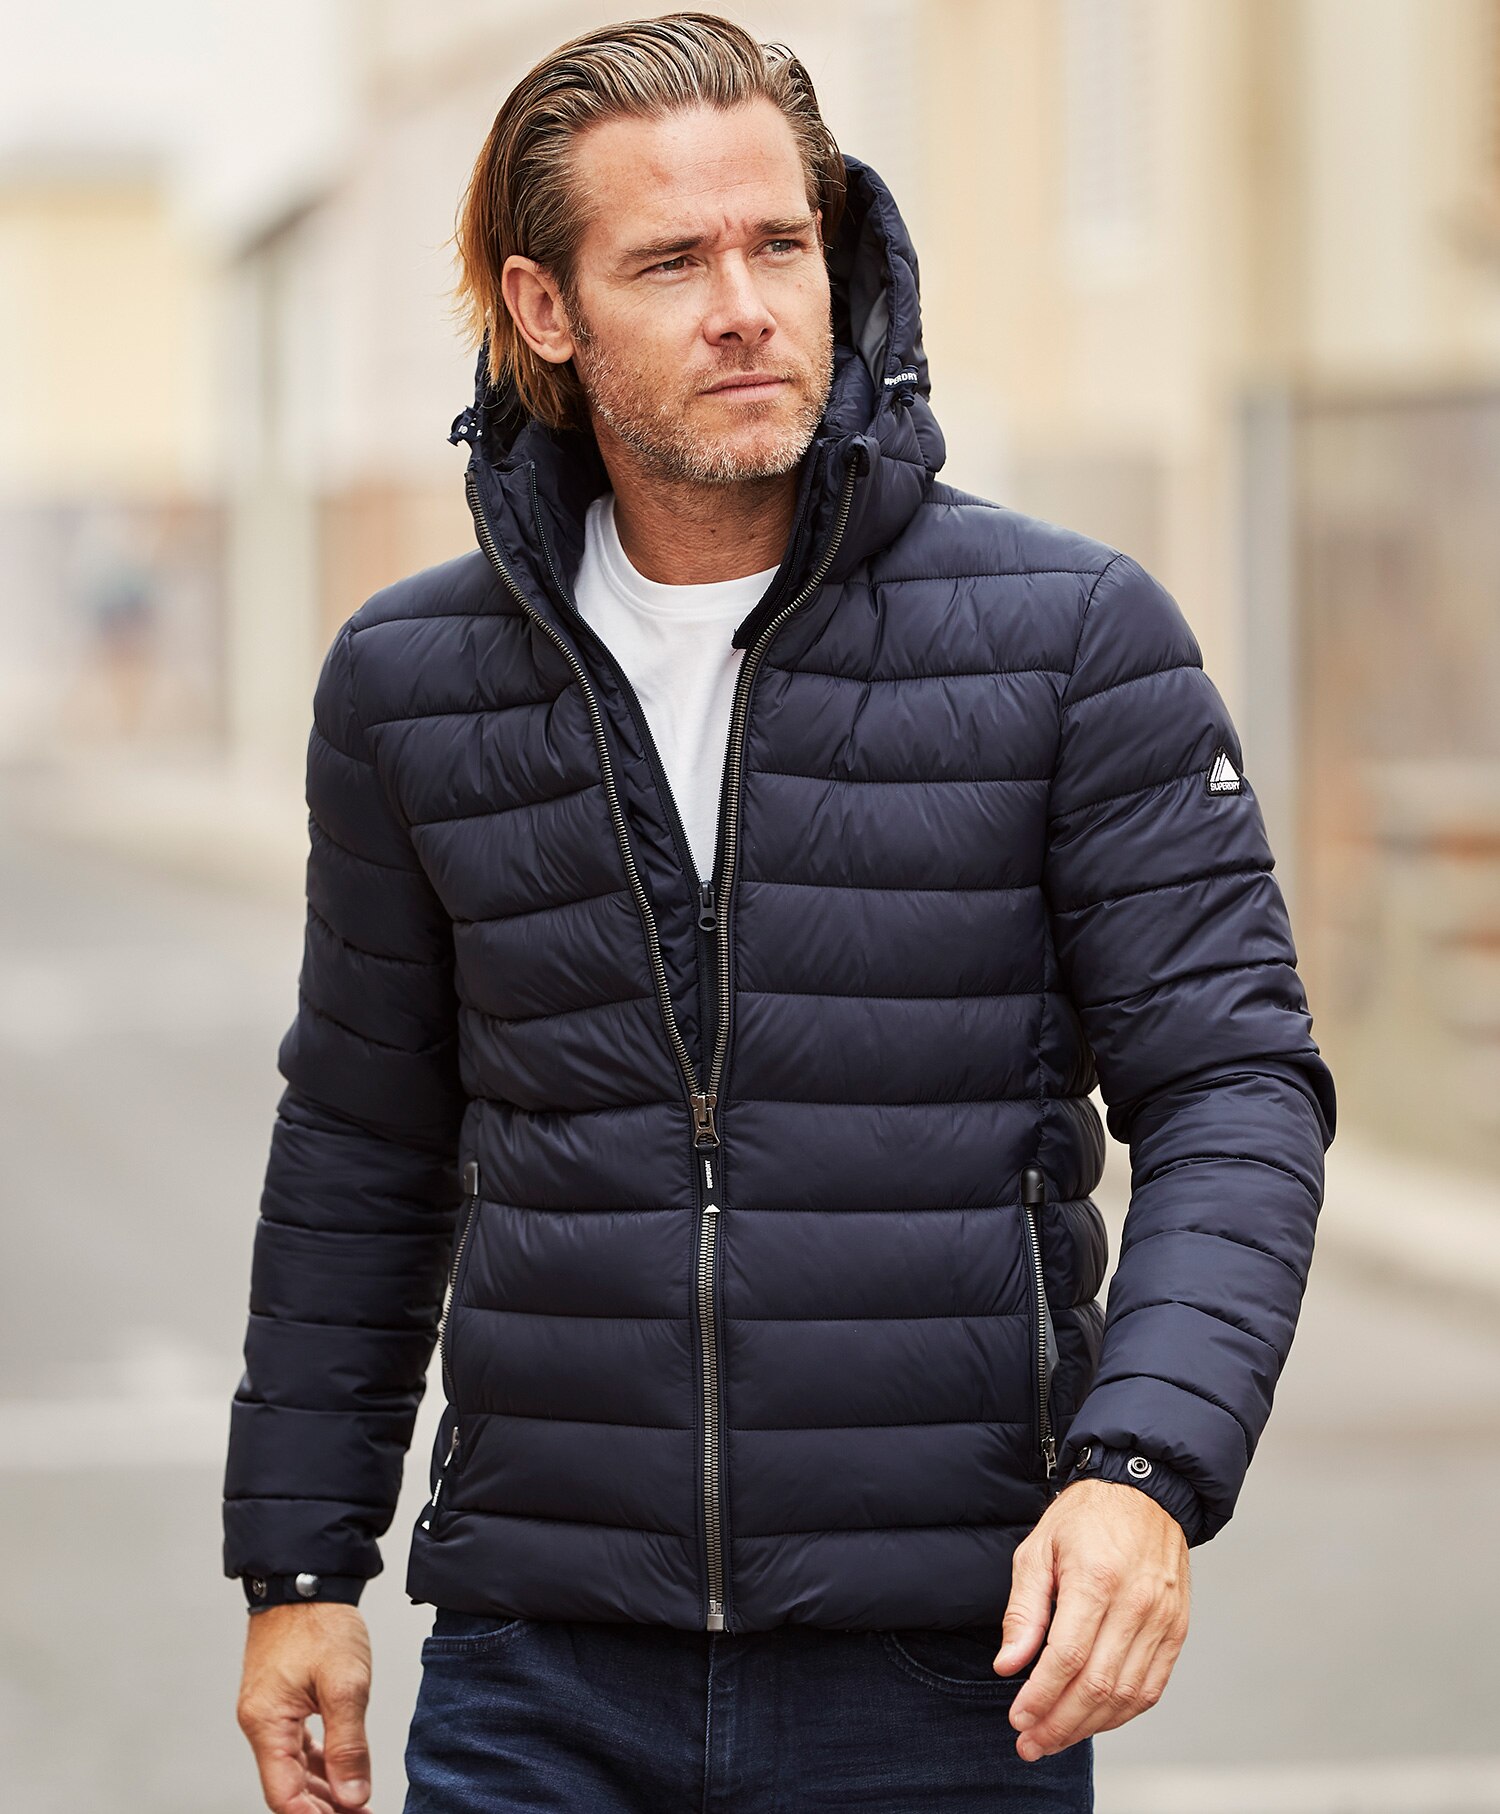 Superdry Classic Jacket